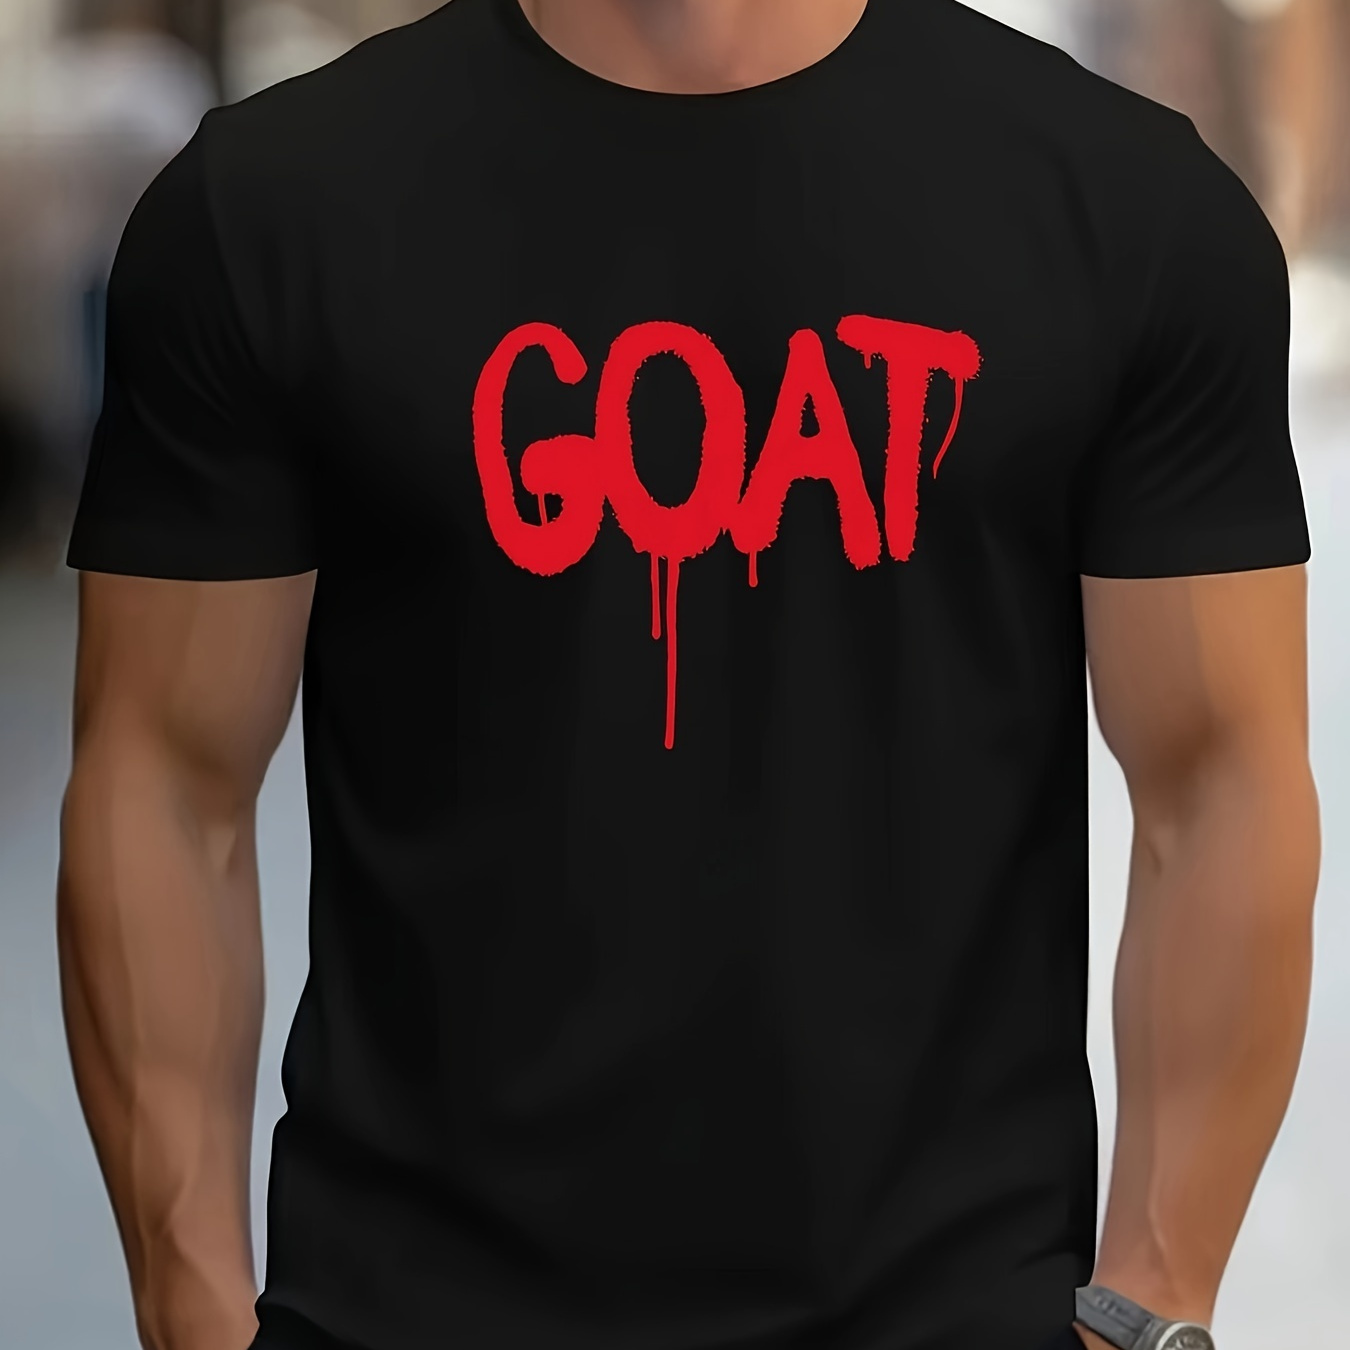 

Goat Letter Print Men's Short Sleeve Crew Neck T-shirts, Comfy Breathable Casual Slightly Stretch Tops, Men's Clothings